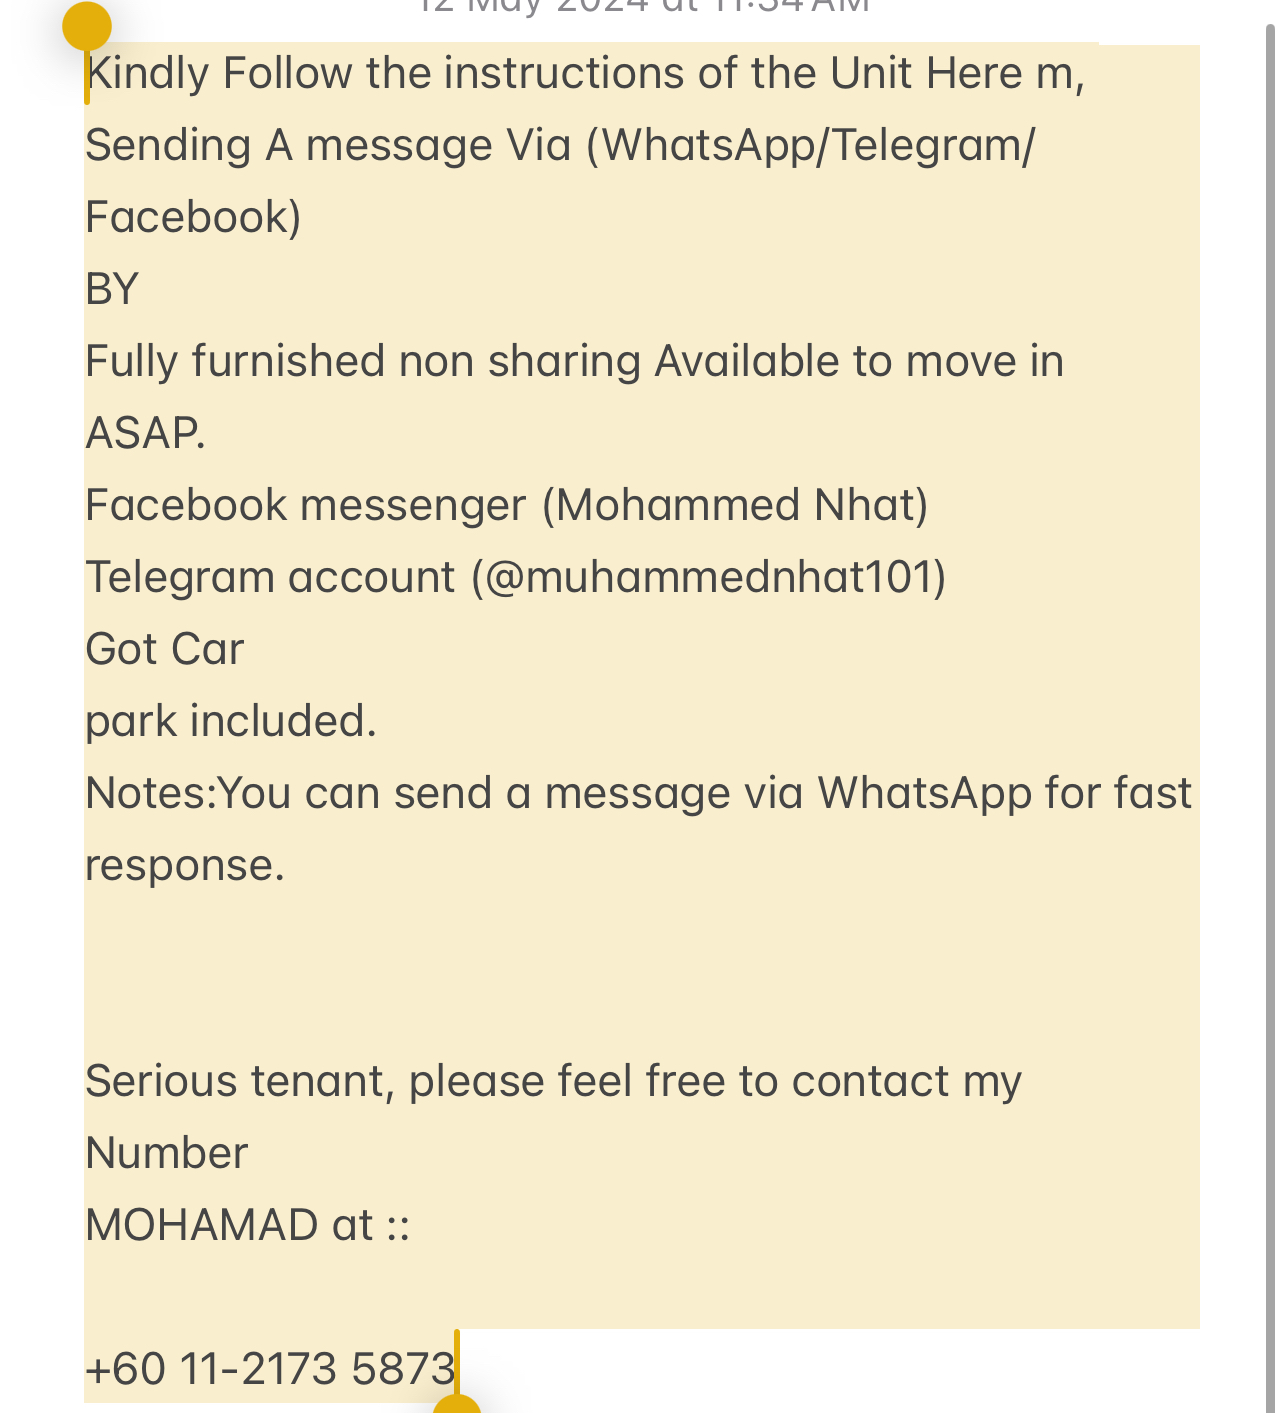 room for rent, master room, heritage condominium, Send the owner a message on WhatsApp/facebook if you want to RENT the unit facebook (Mohammed Nhat)&Telegram(@muhammednhat101) Fully furnished non sharing :(comfortable)